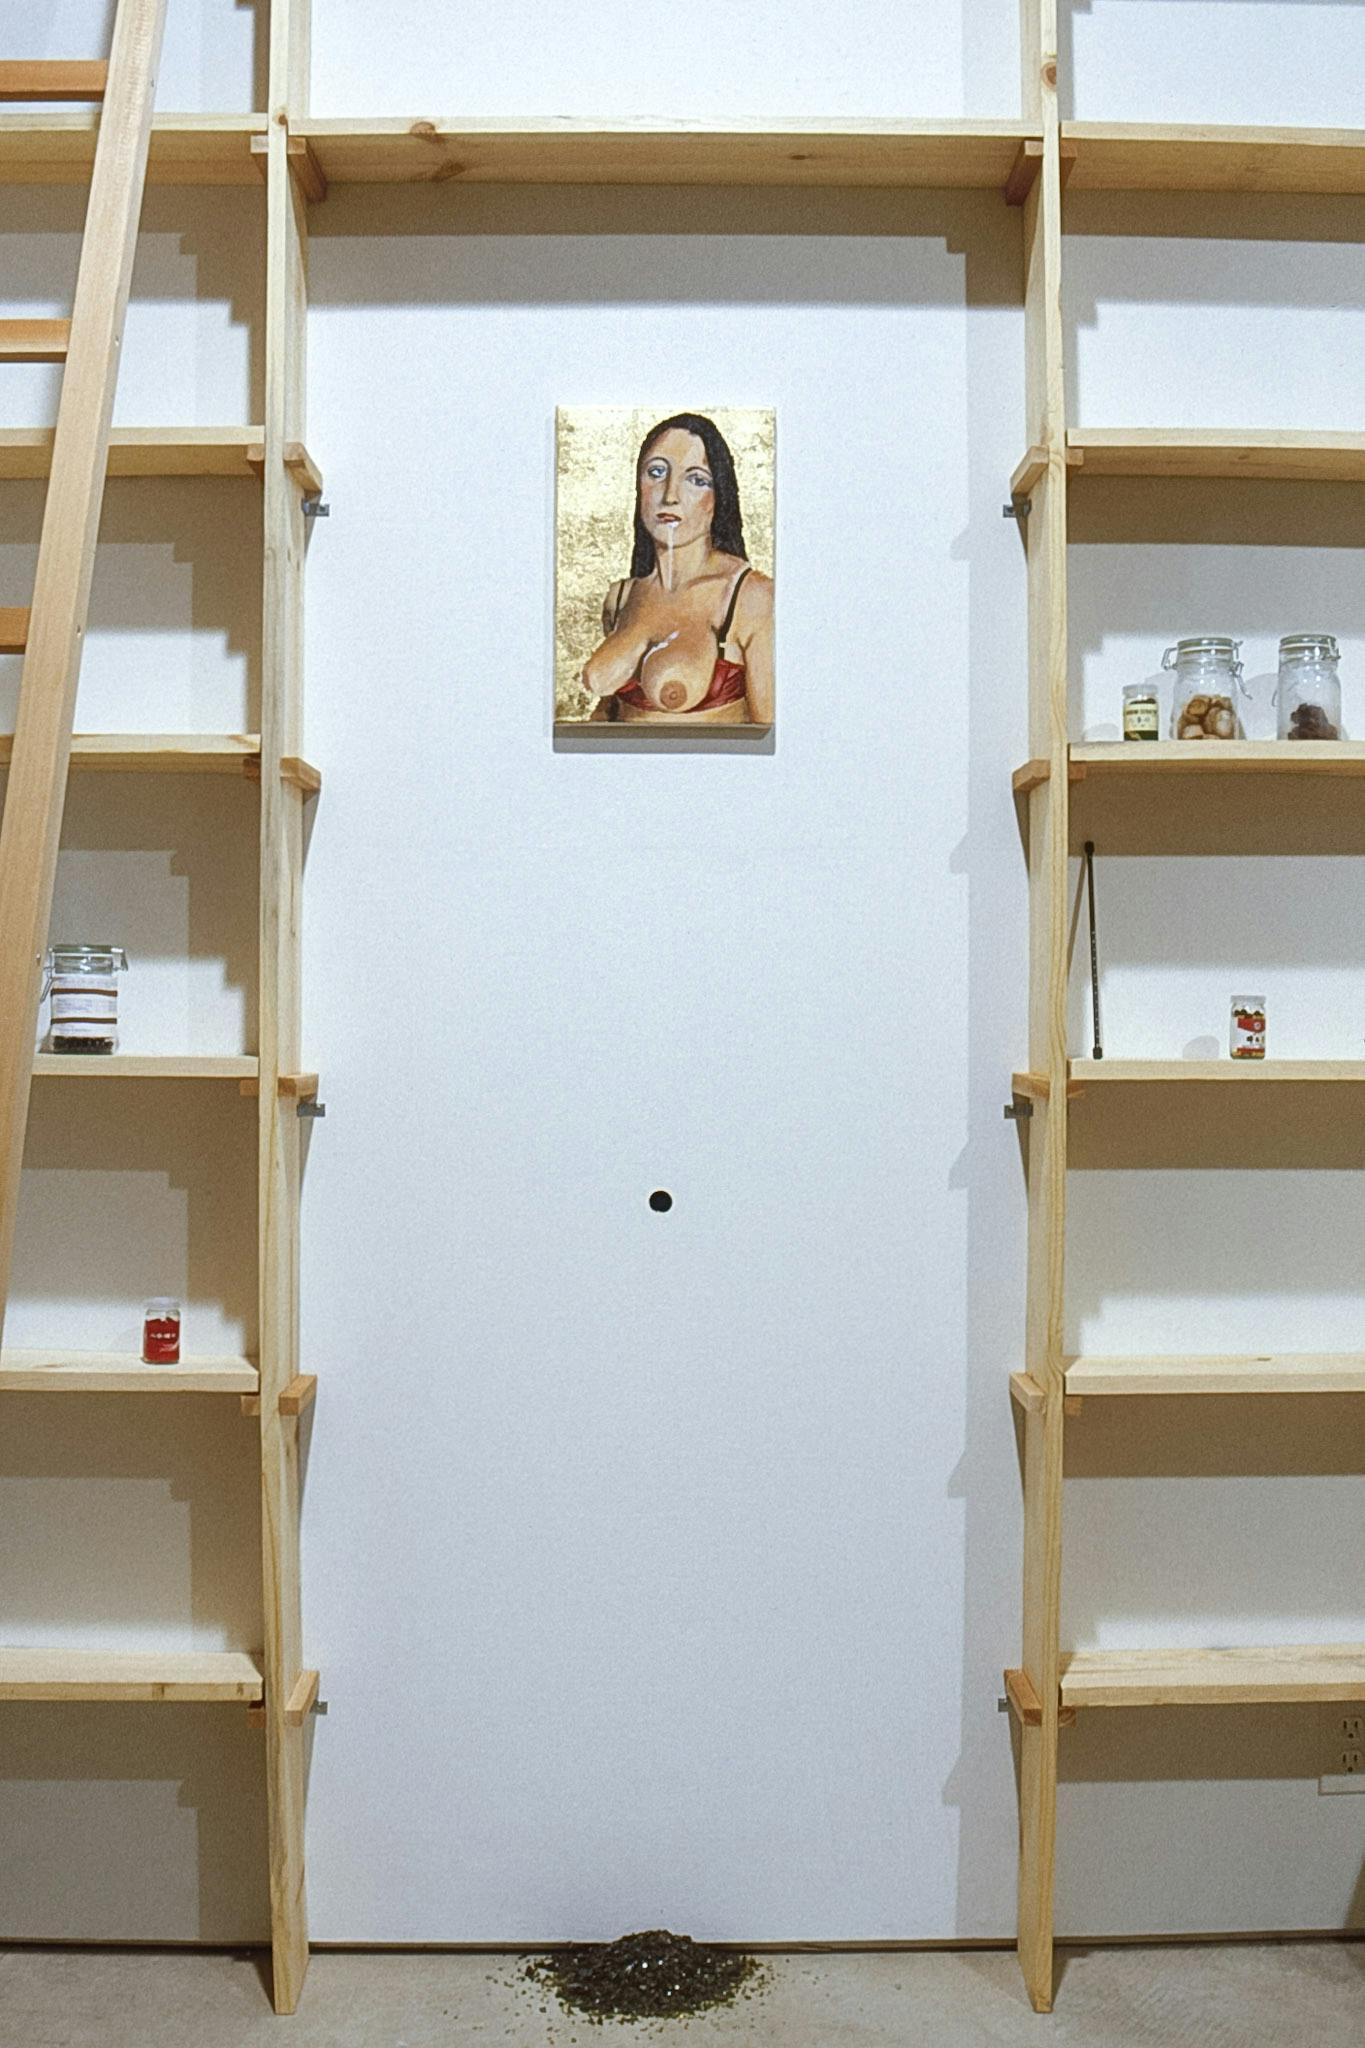 Tall wooden shelves, which one would expect to see in a pantry, are built in the gallery. On the wall behind the shelves, a topless woman’s painting is mounted above a small pile of dirt on the floor.